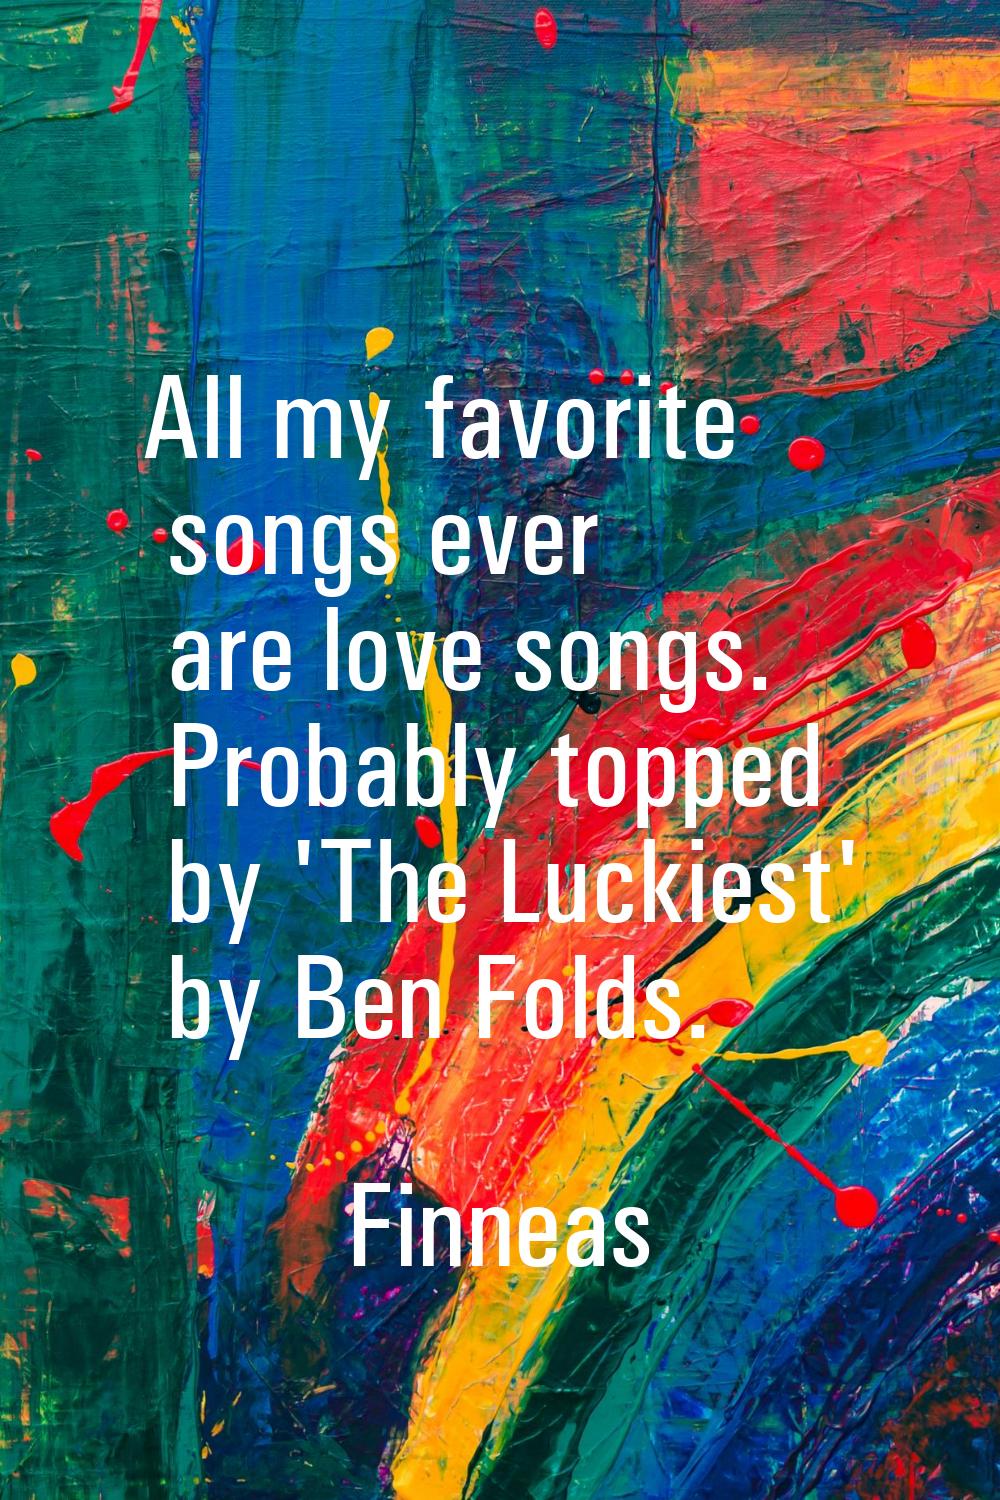 All my favorite songs ever are love songs. Probably topped by 'The Luckiest' by Ben Folds.